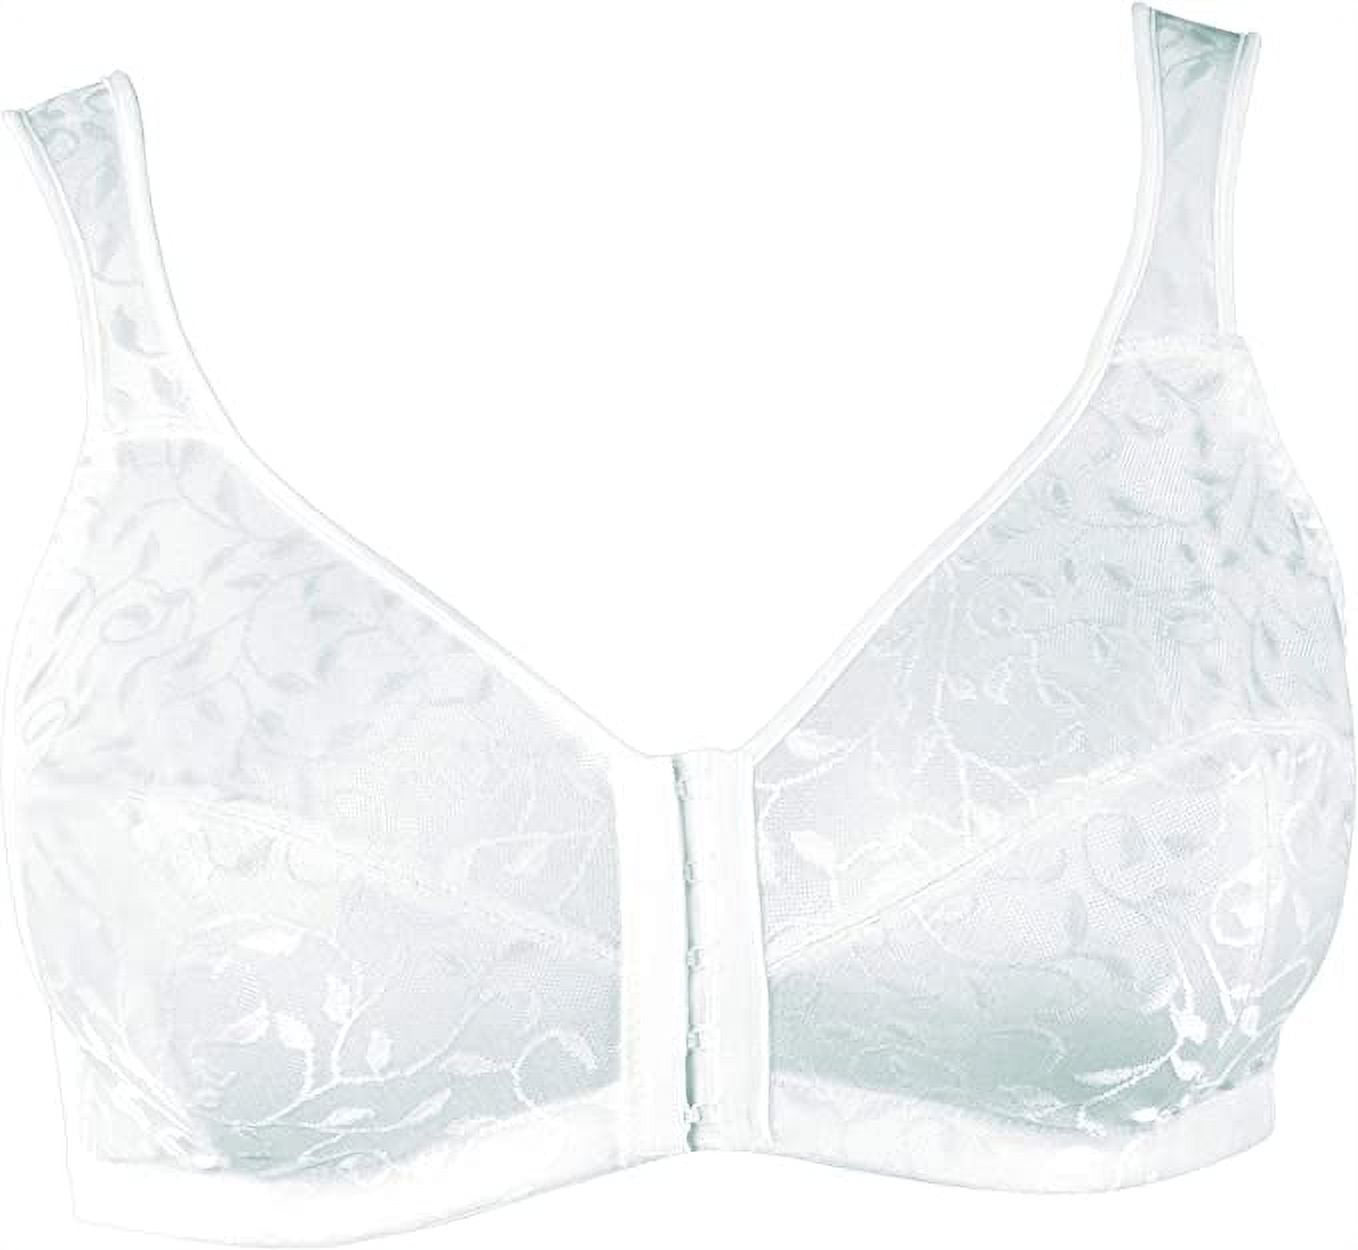 Just My Size Women's White Front Close Wire-Free Bra, Style 1107 Sz 42C